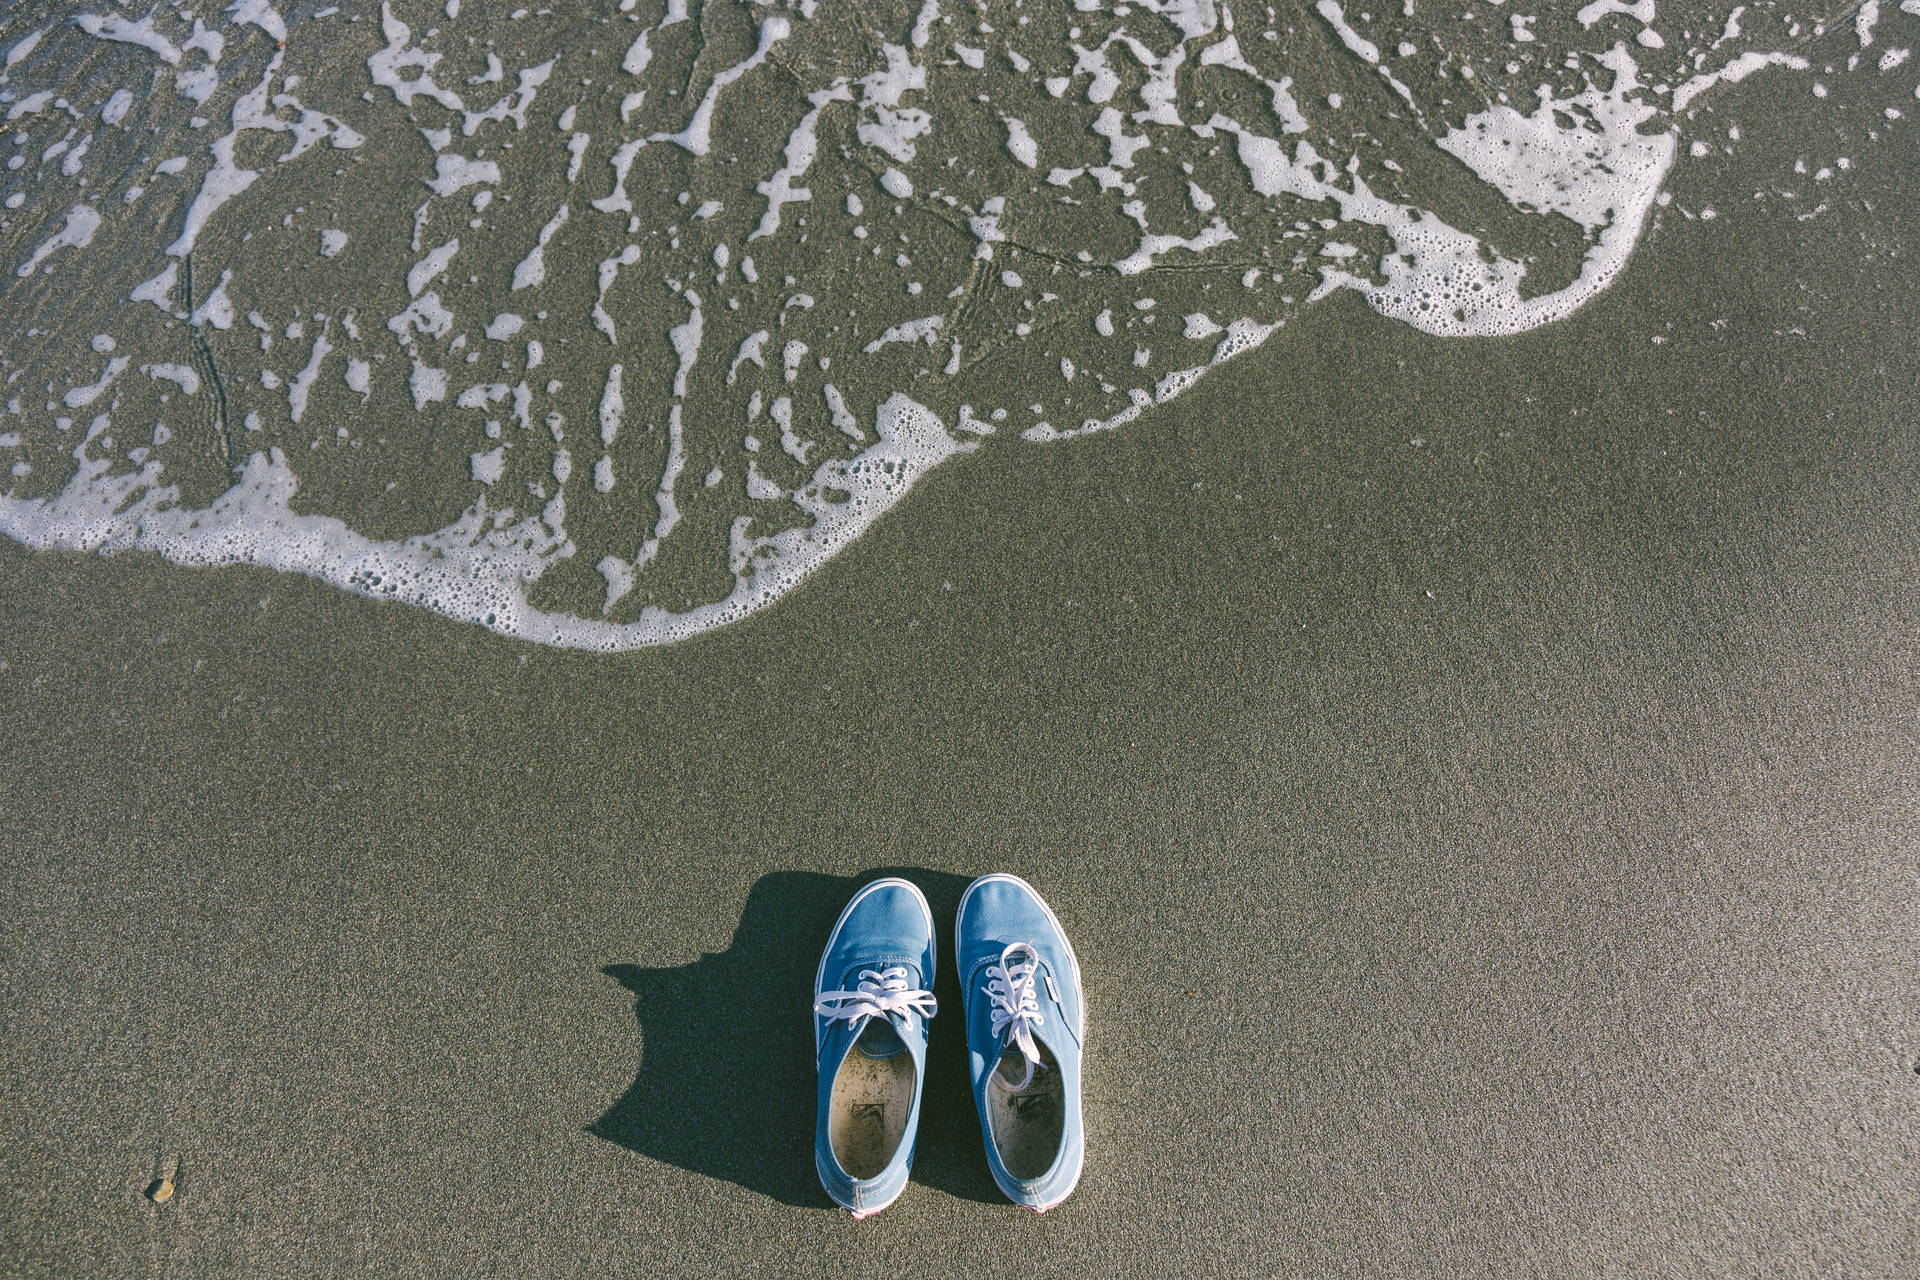 Blue Shoes By The Beach Wallpaper